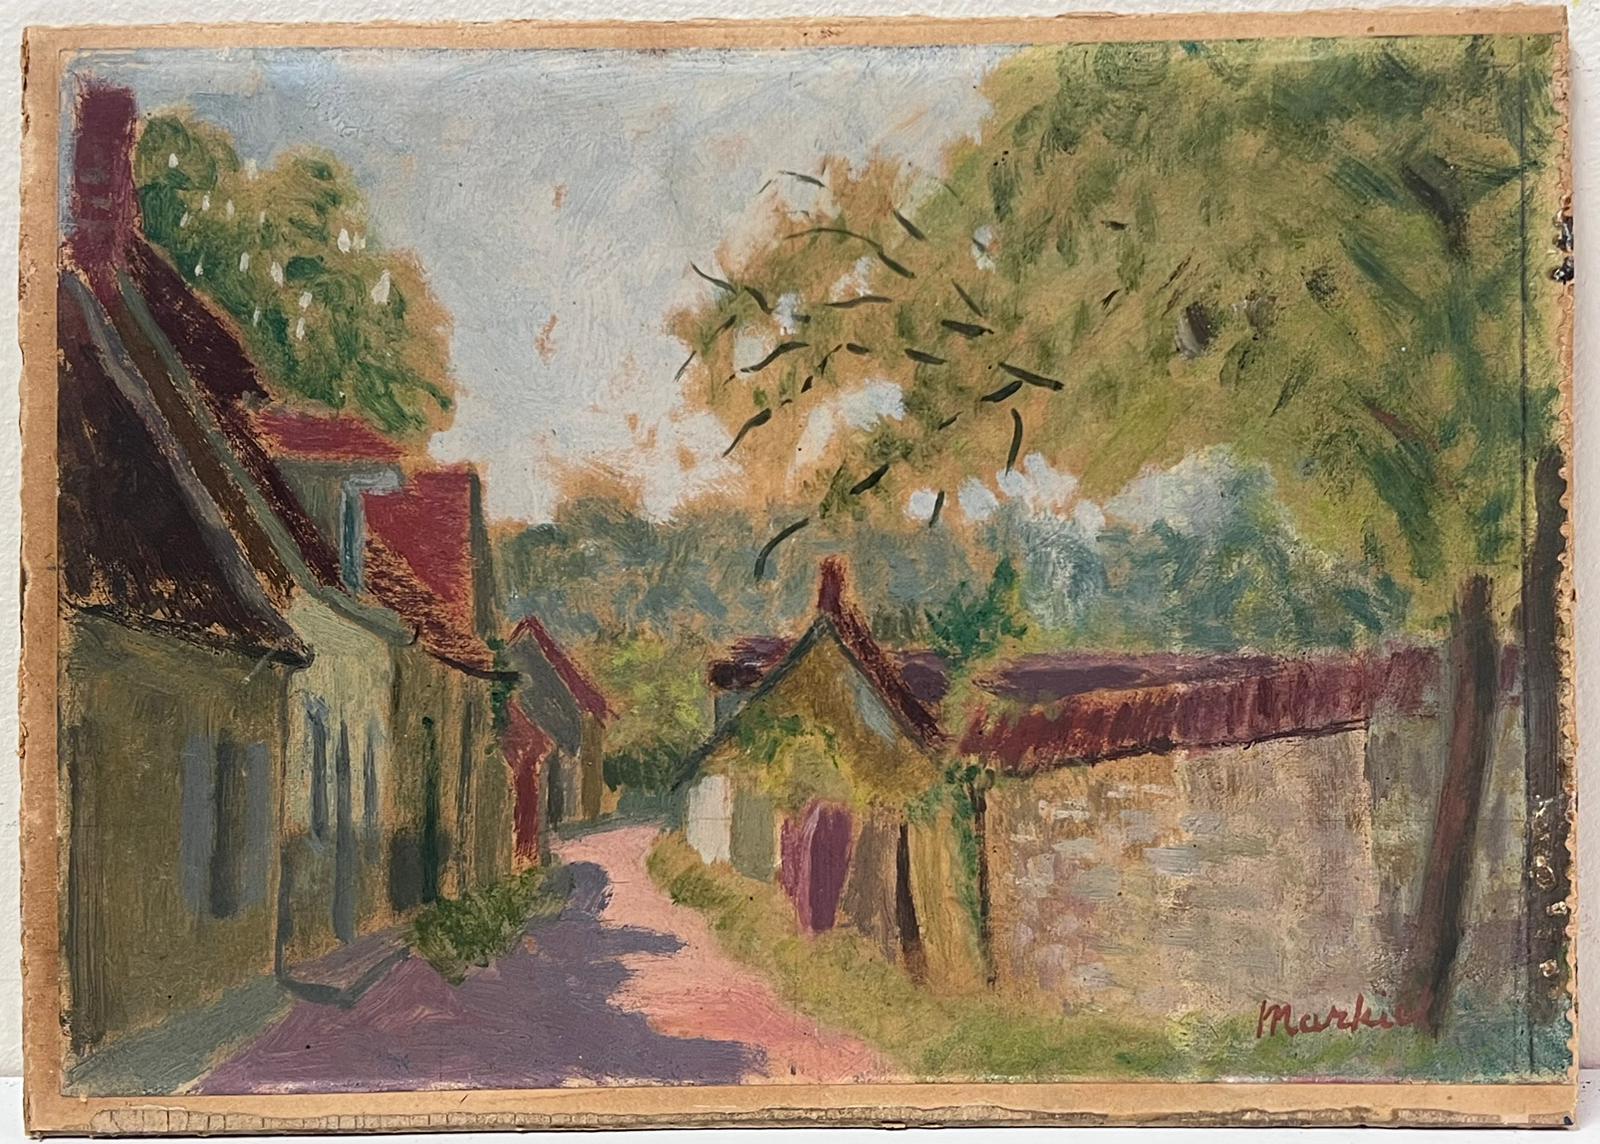 The Village Lane
by Jacob Markiel (Polish 1911-2008)
signed oil on canvas, glued on board, unframed
board: 8 x 11 inches
provenance: private collection, Marseille
condition: very good and sound condition

Jacob Markiel was born into a humble family